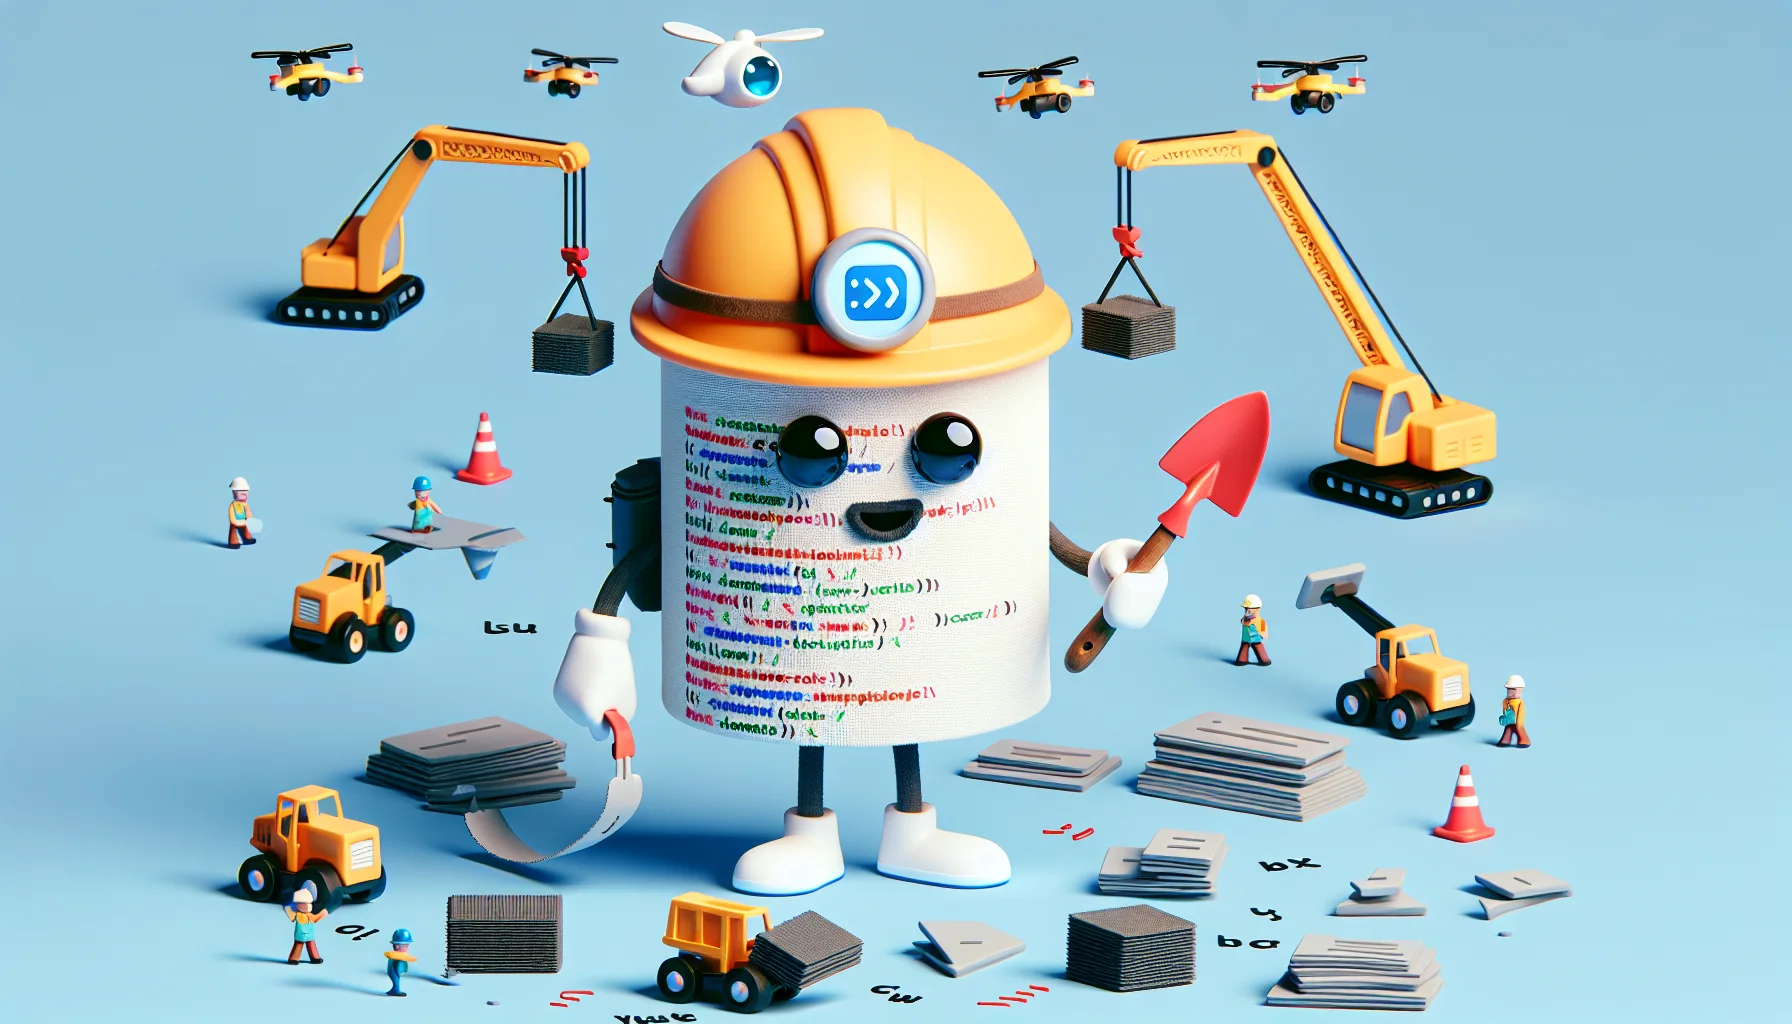 Generate a whimsical image of a character representing a generic website building platform. This character is a mixture of a builder and a web designer, wearing a hard hat with code symbols on it and holding a trowel in one hand and a computer mouse in the other. Around him, miniature cranes are lifting HTML tags into place while tiny drones are transporting images and videos for multimedia integration. The scenario is humorous and attractive, and subtly sows the seed of the thought that the consumption of web hosting services is an enjoyable and creative task.